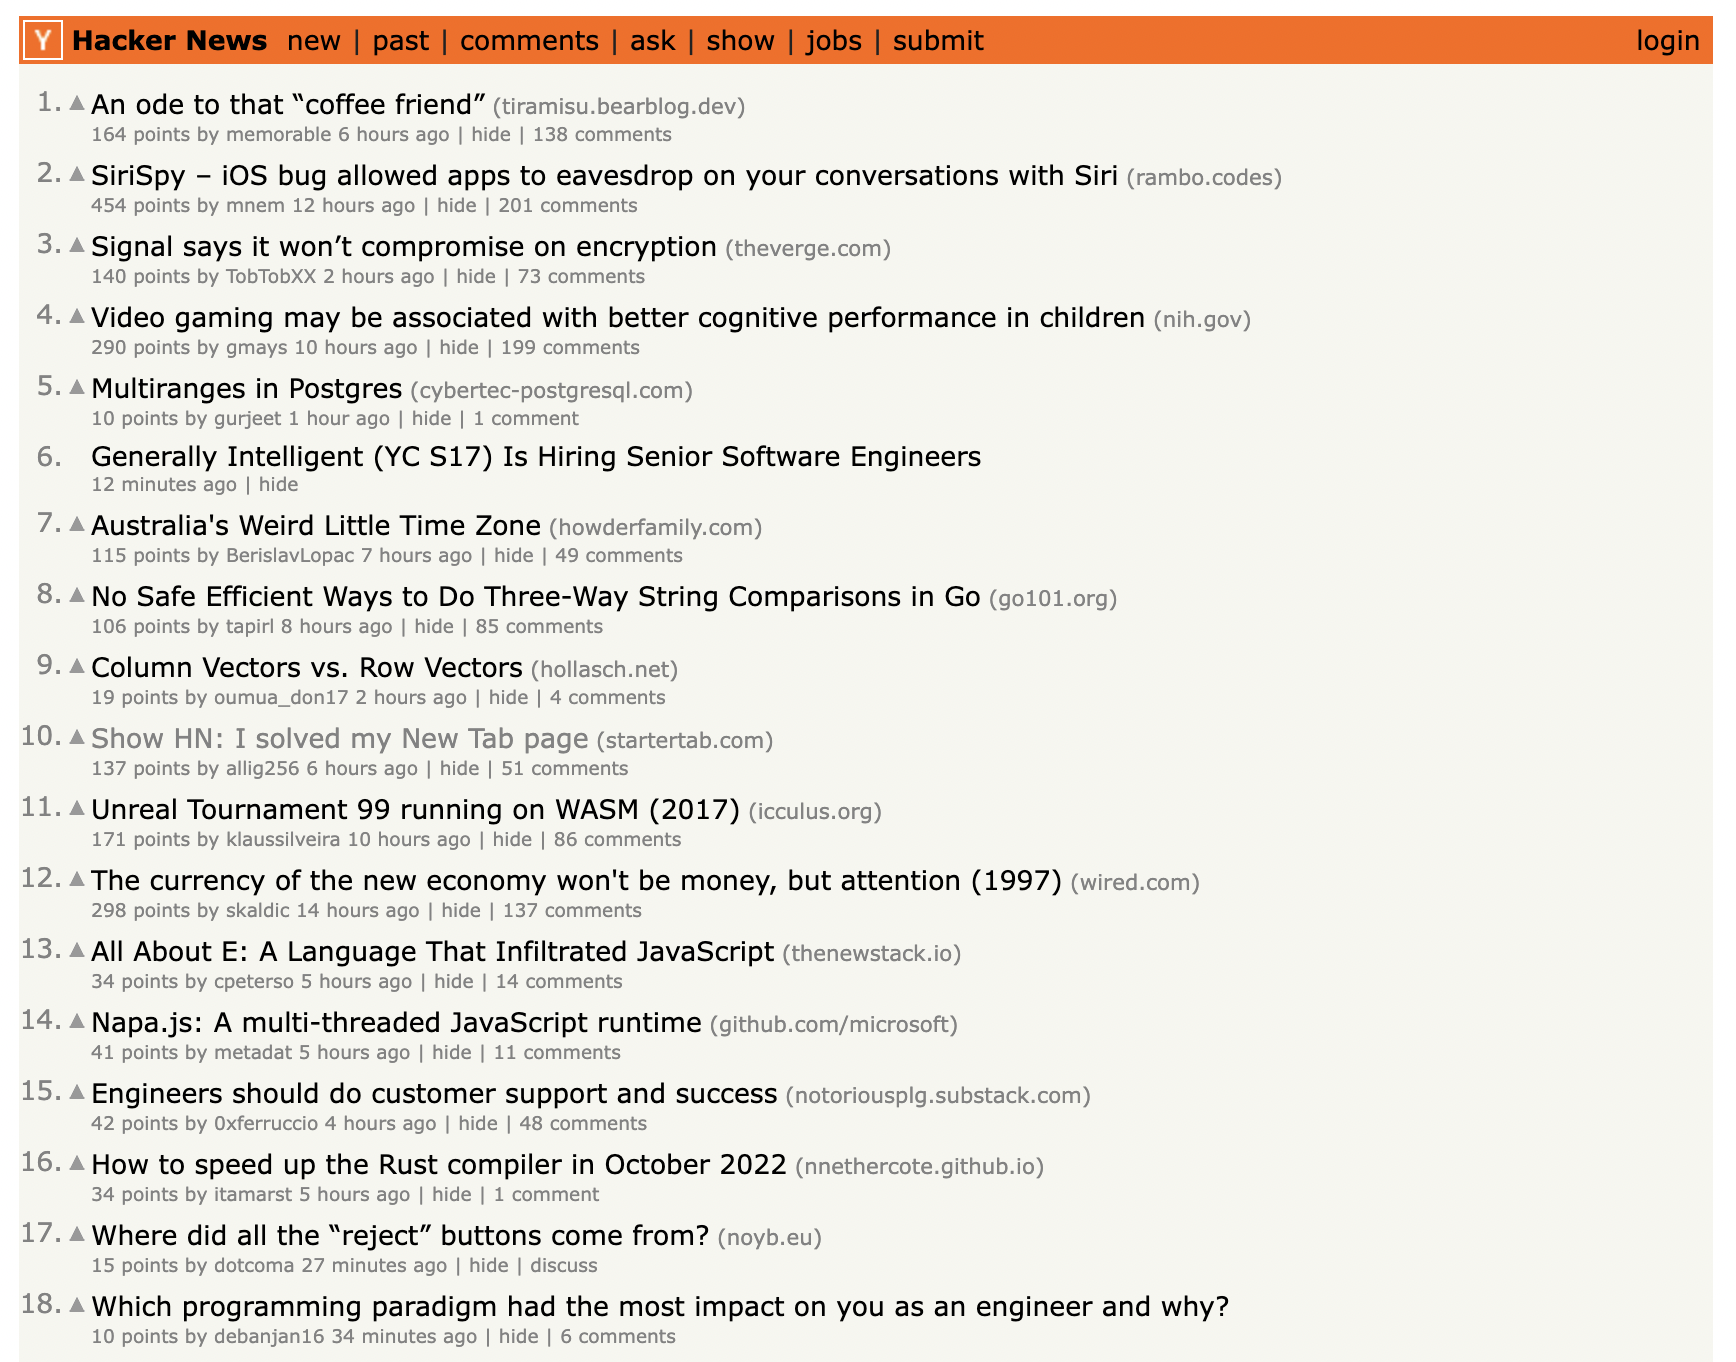 Hacker News website used in the example